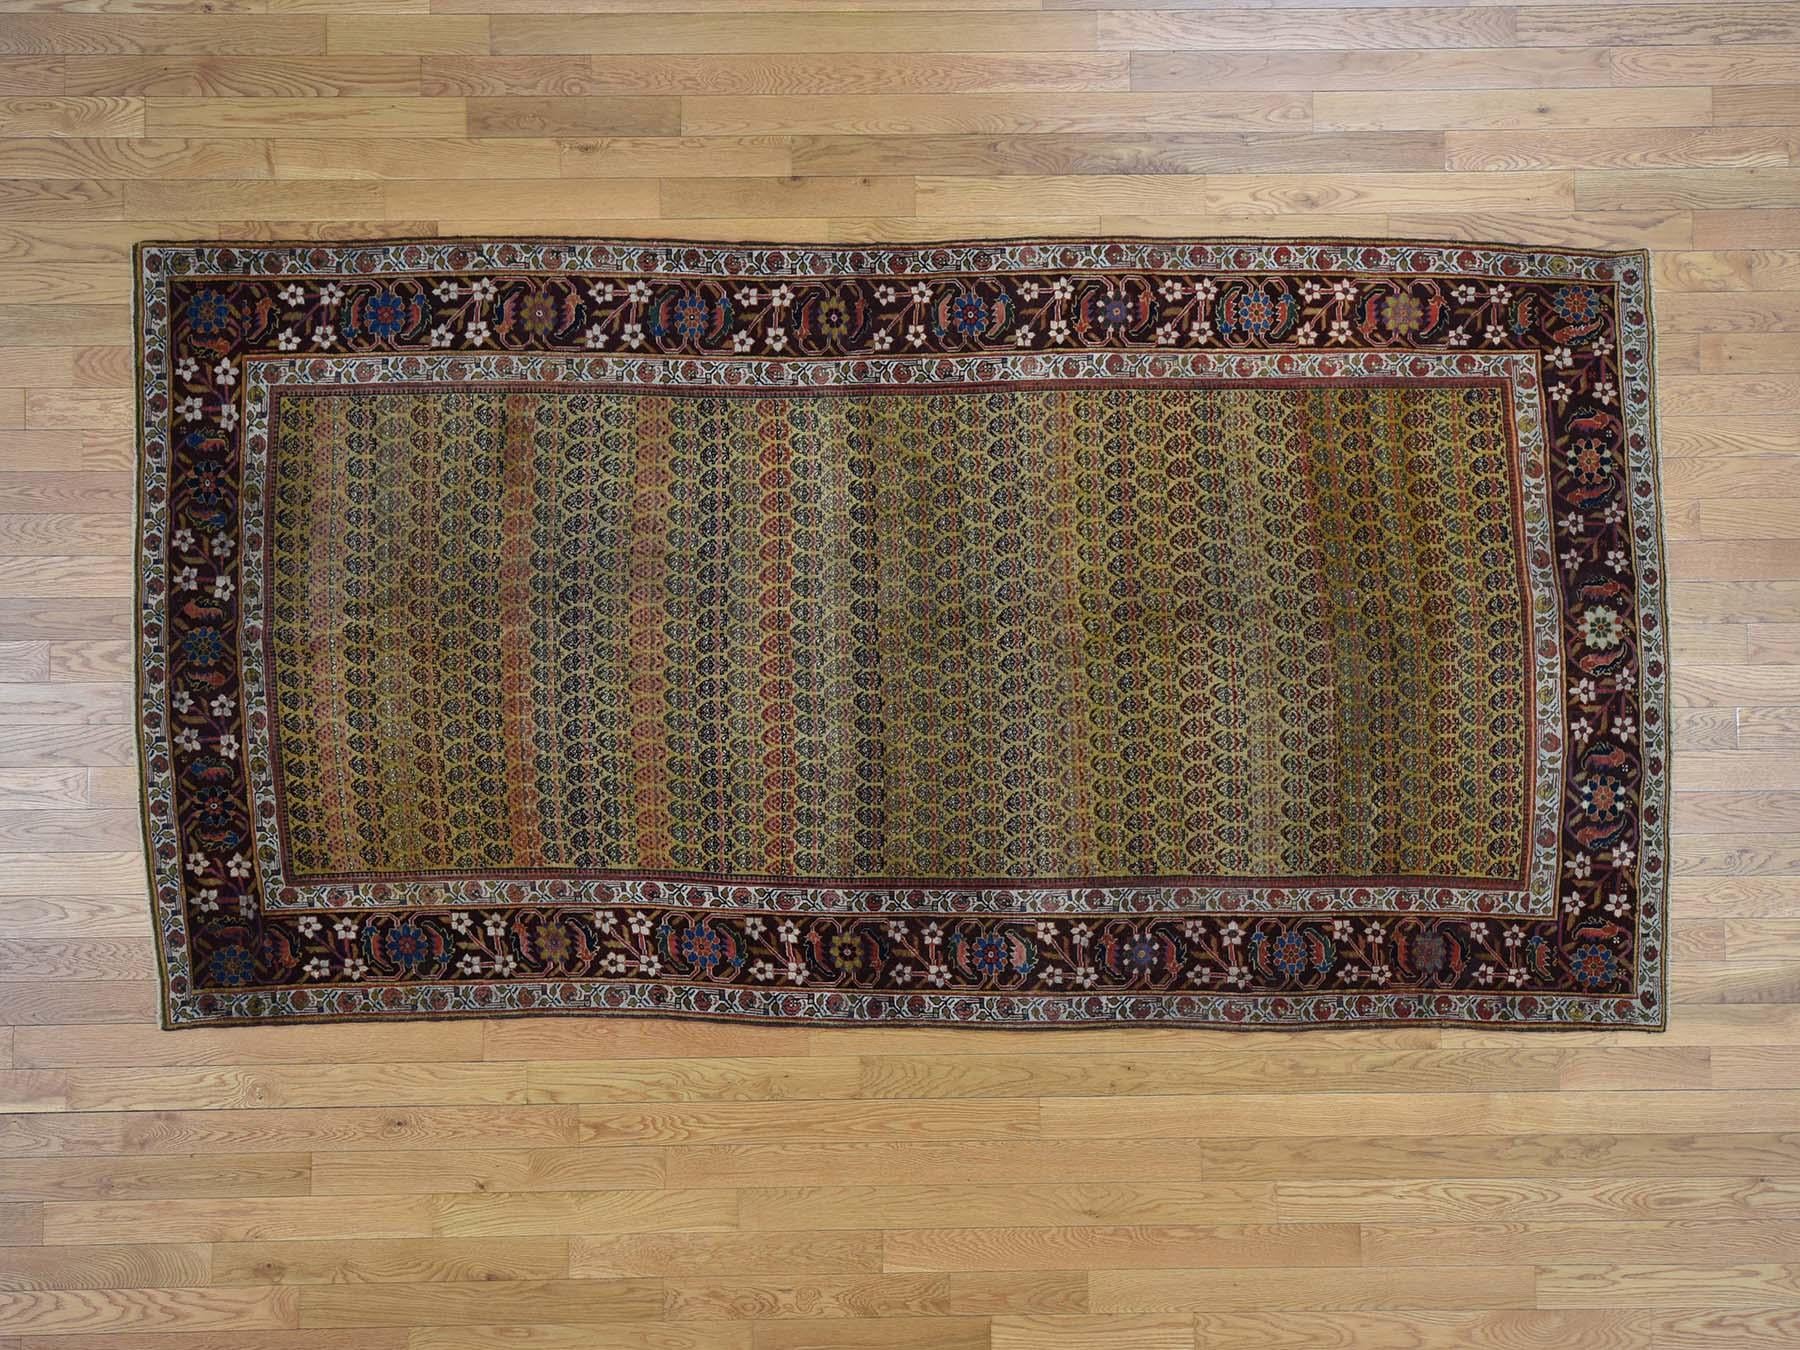 This is a genuine hand knotted oriental rug. It is not hand tufted or machine made rug. Our entire inventory is made of either hand-knotted or hand-woven rugs.

Decorate your home with this high quality antique carpet. This handcrafted Persian